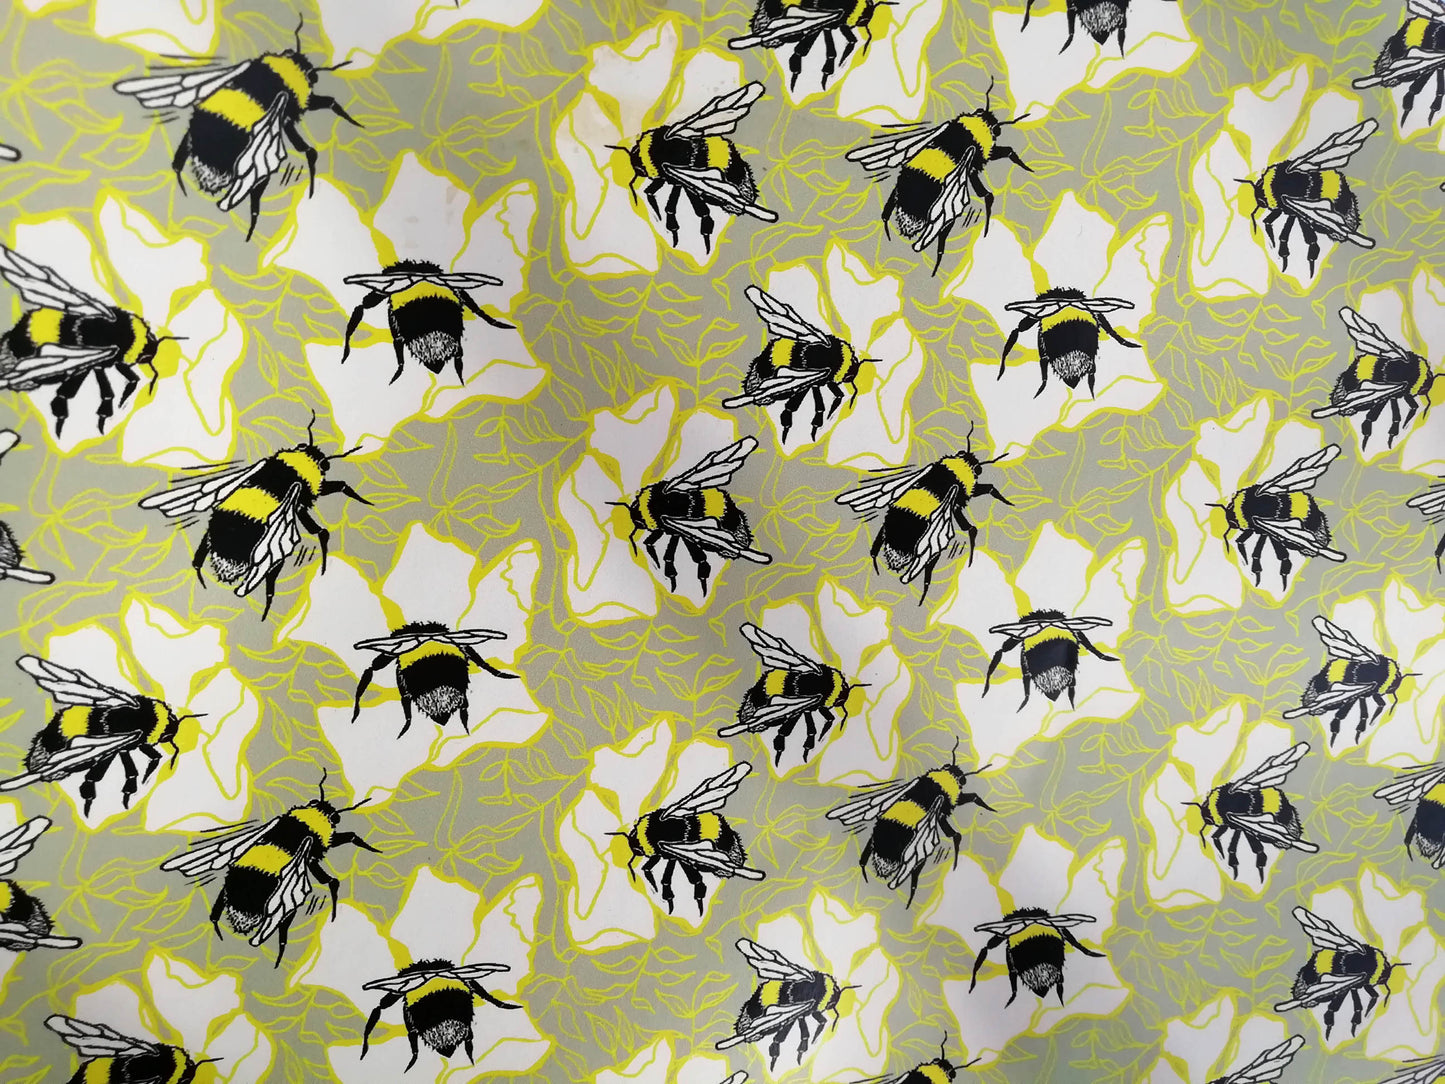 Bumble Bees with yellow details on grey